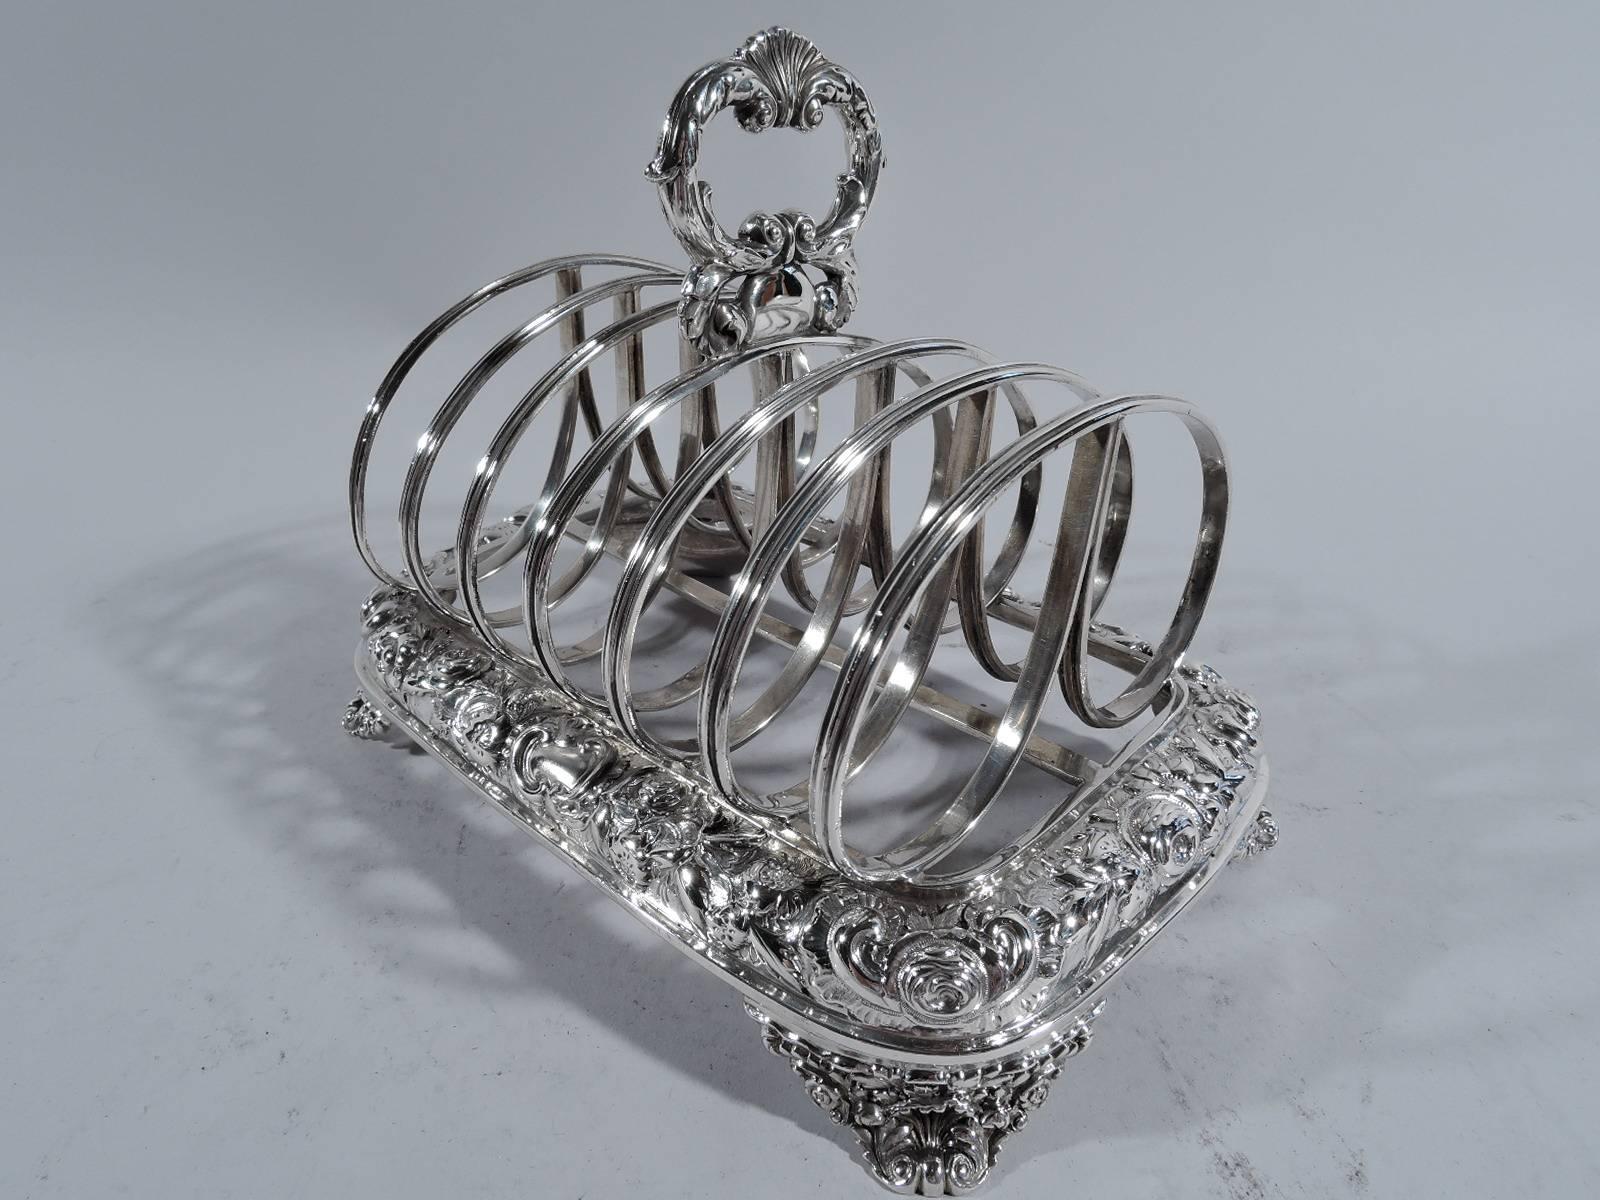 George IV sterling silver toast rack. Made by Joseph Craddock in London in 1826. Seven partitions in form of reeded double loops mounted to quadrilateral frame on corner supports with volute scrolls and flowers. Frame has central stretcher and